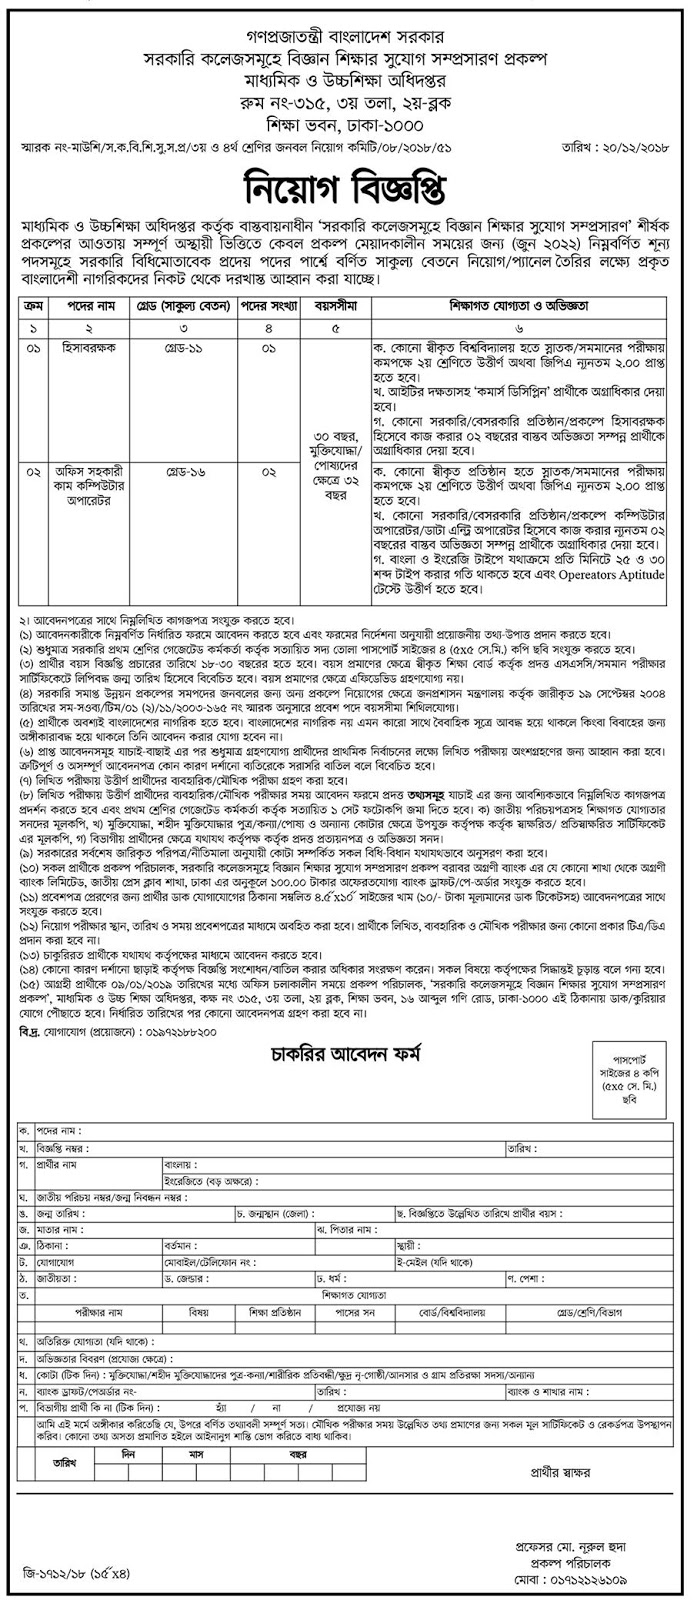 Directorate of Secondary and Higher Education (DSHE)Job Circular 2018